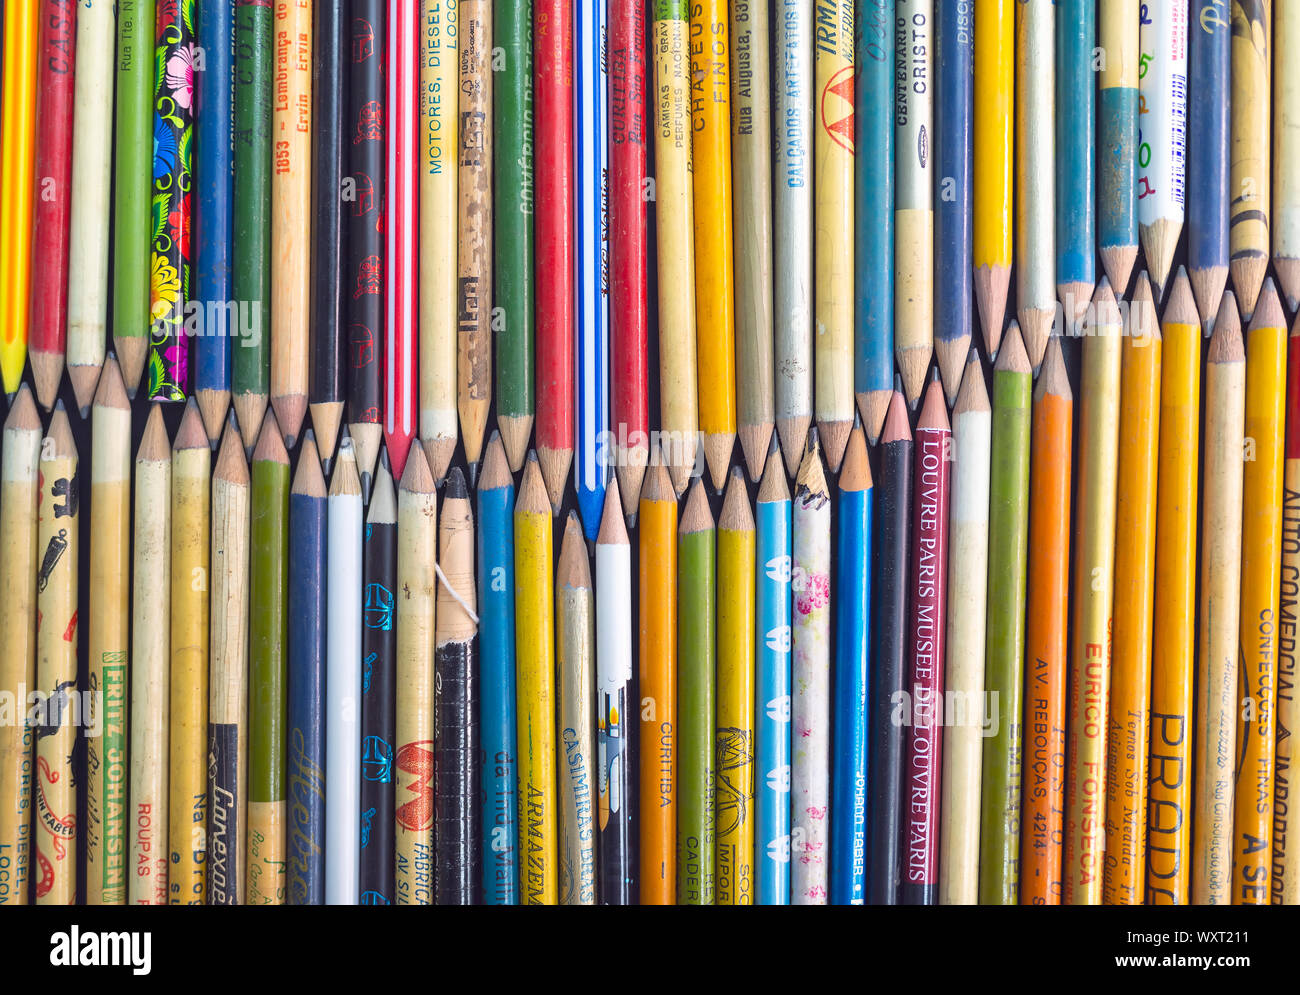 Photo of several old pencils, collection of pencils that no longer exist. Stock Photo